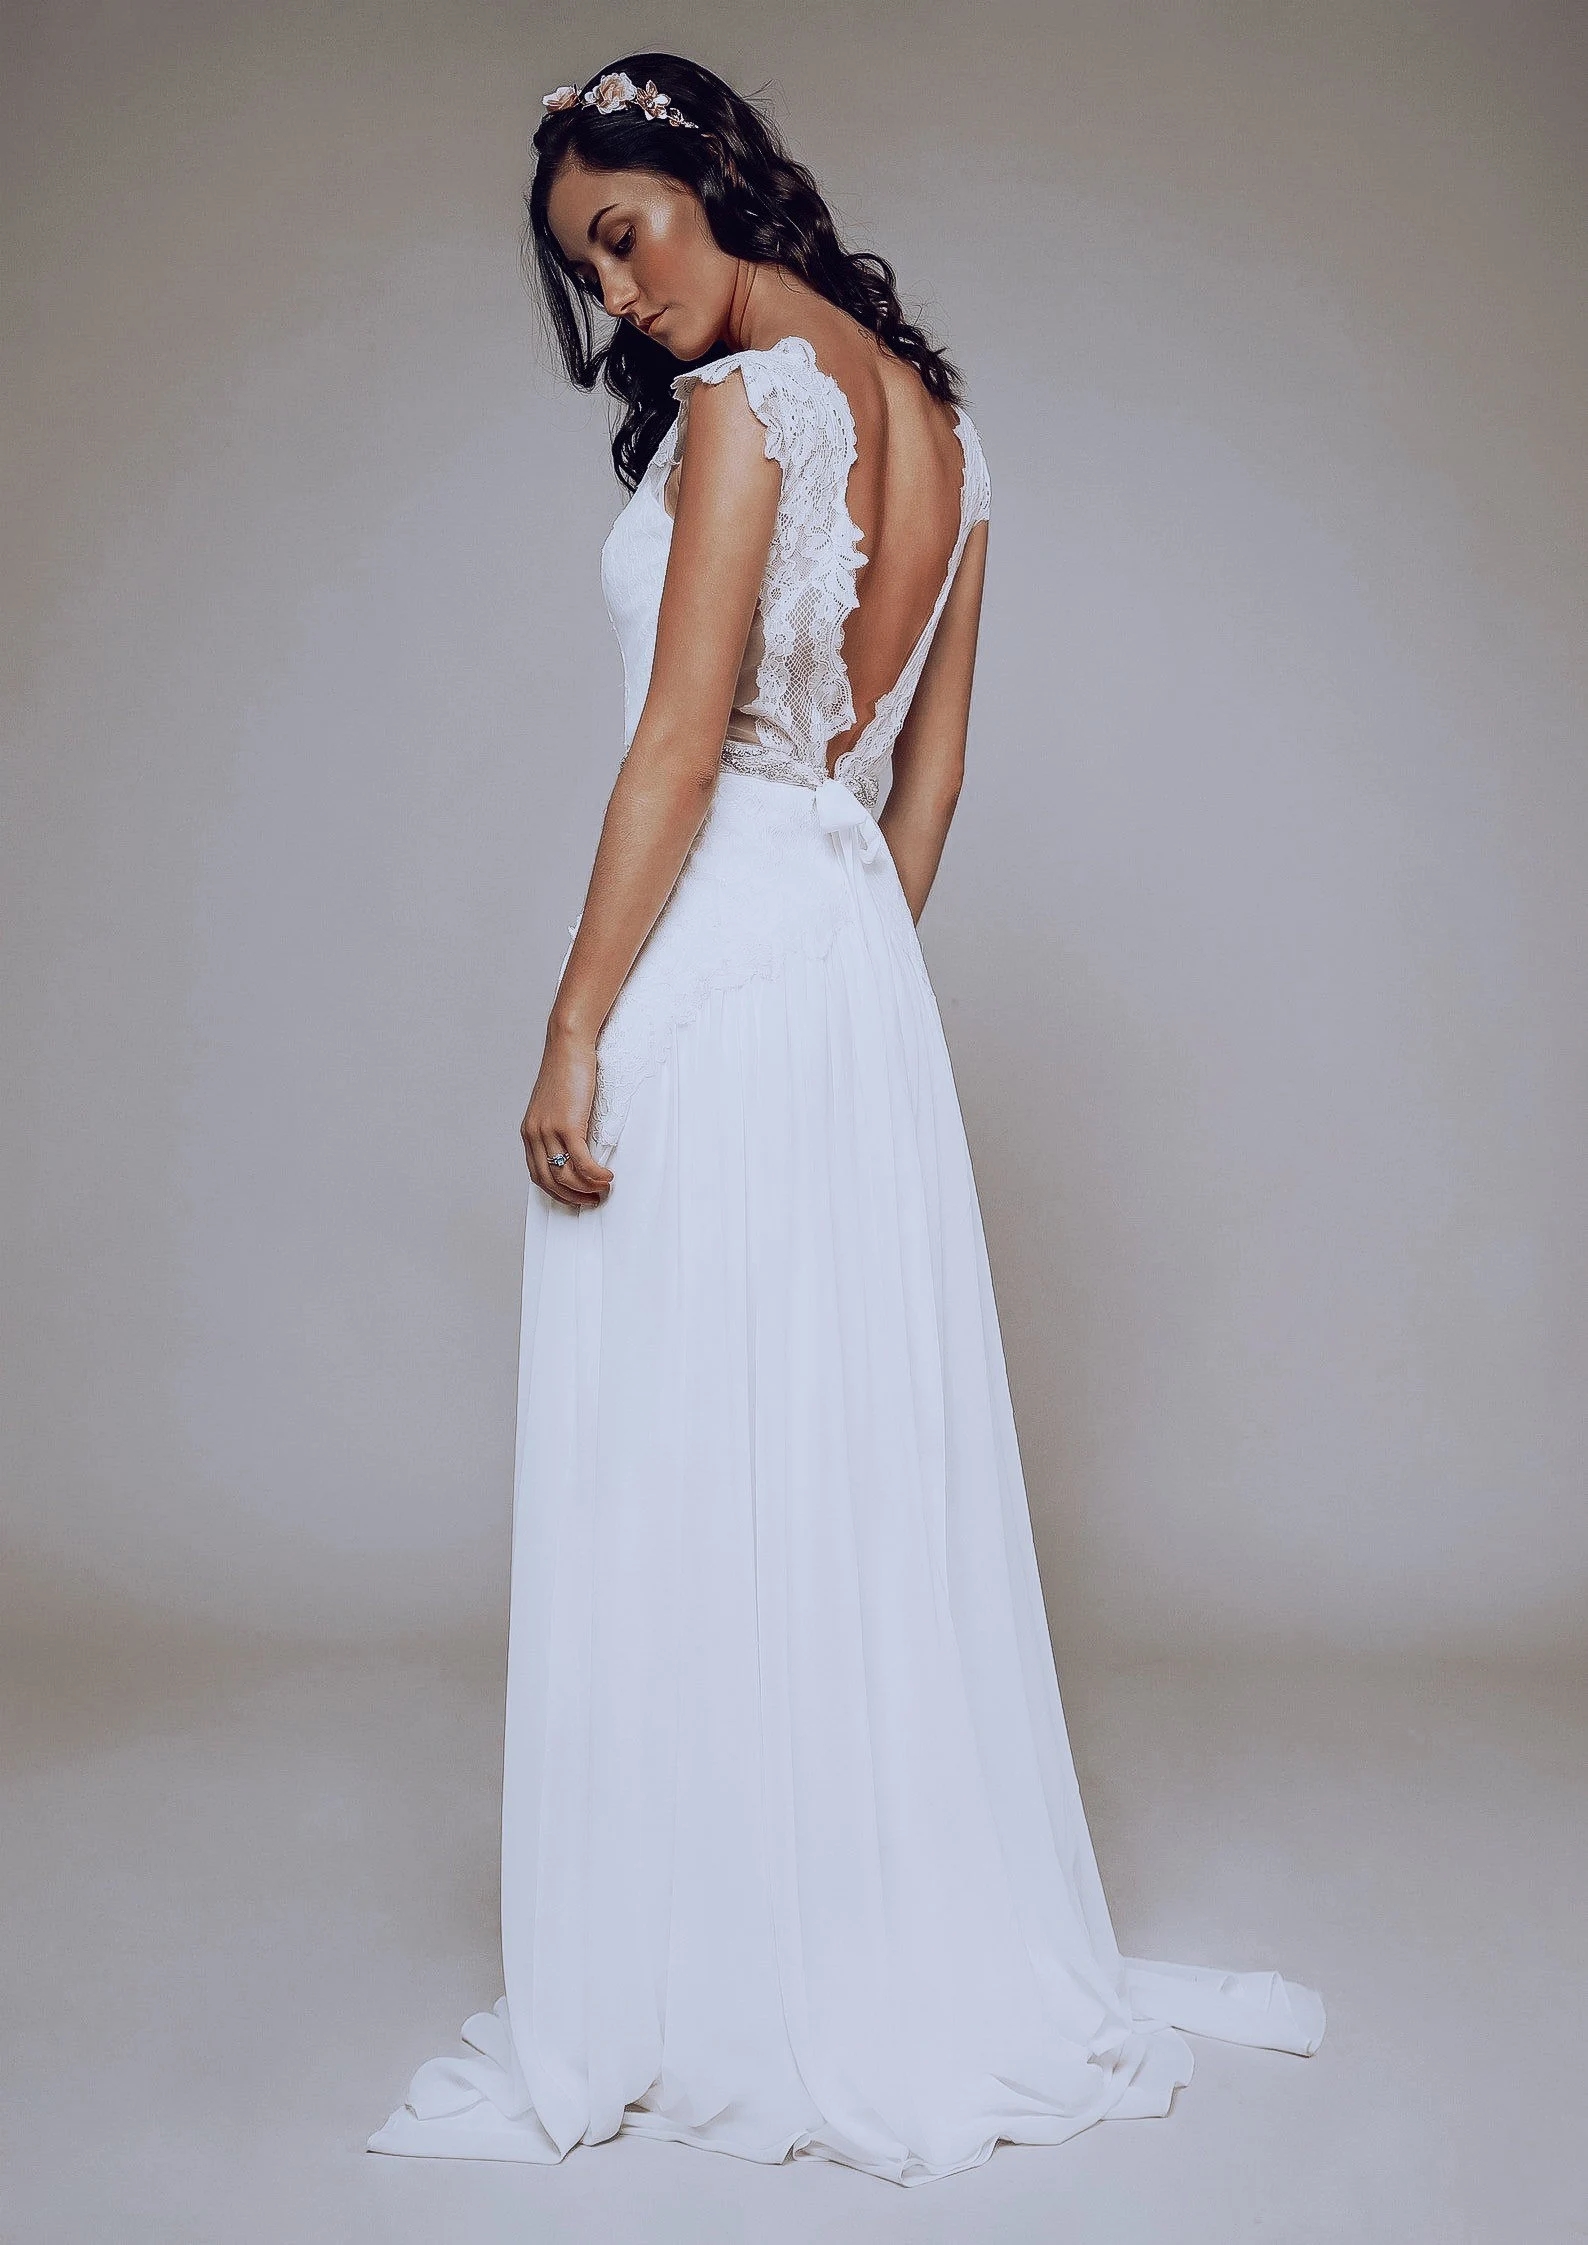 V Neck Sexy A Line Wedding Dresses Backless Elegant Chiffon Boho White Lace Beach Garden Bridal Gowns With Rhinestones Belt Sweep Train Bride Robes de Mariee CL2830